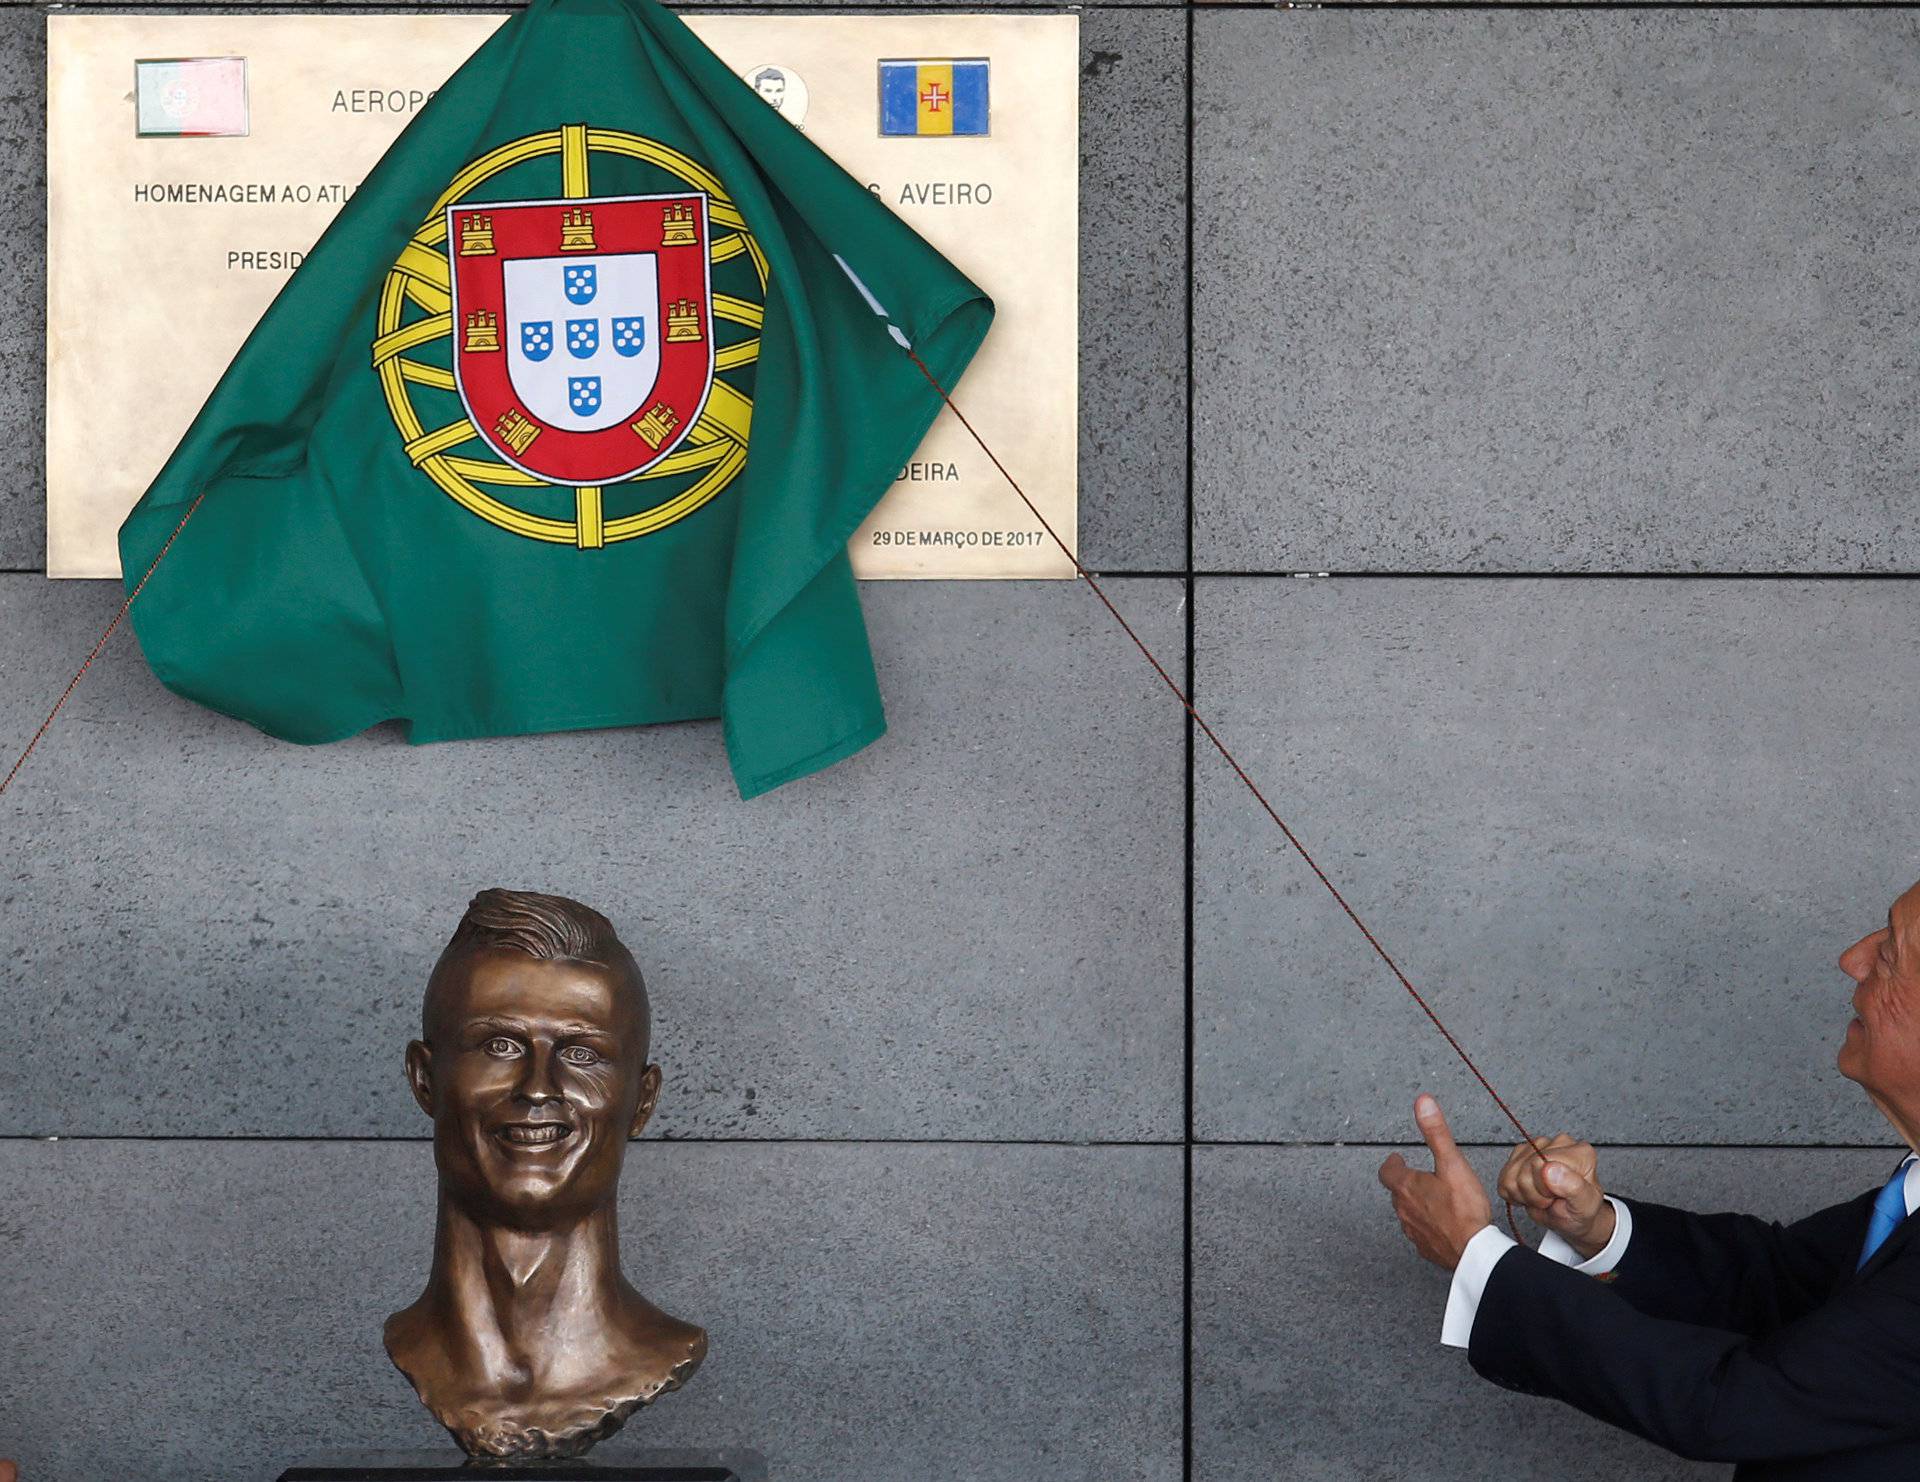 Portugal's President Marcelo Rebelo de Sousa unveils a plaque during the ceremony to rename Funchal airport as Cristiano Ronaldo Airport in Funchal